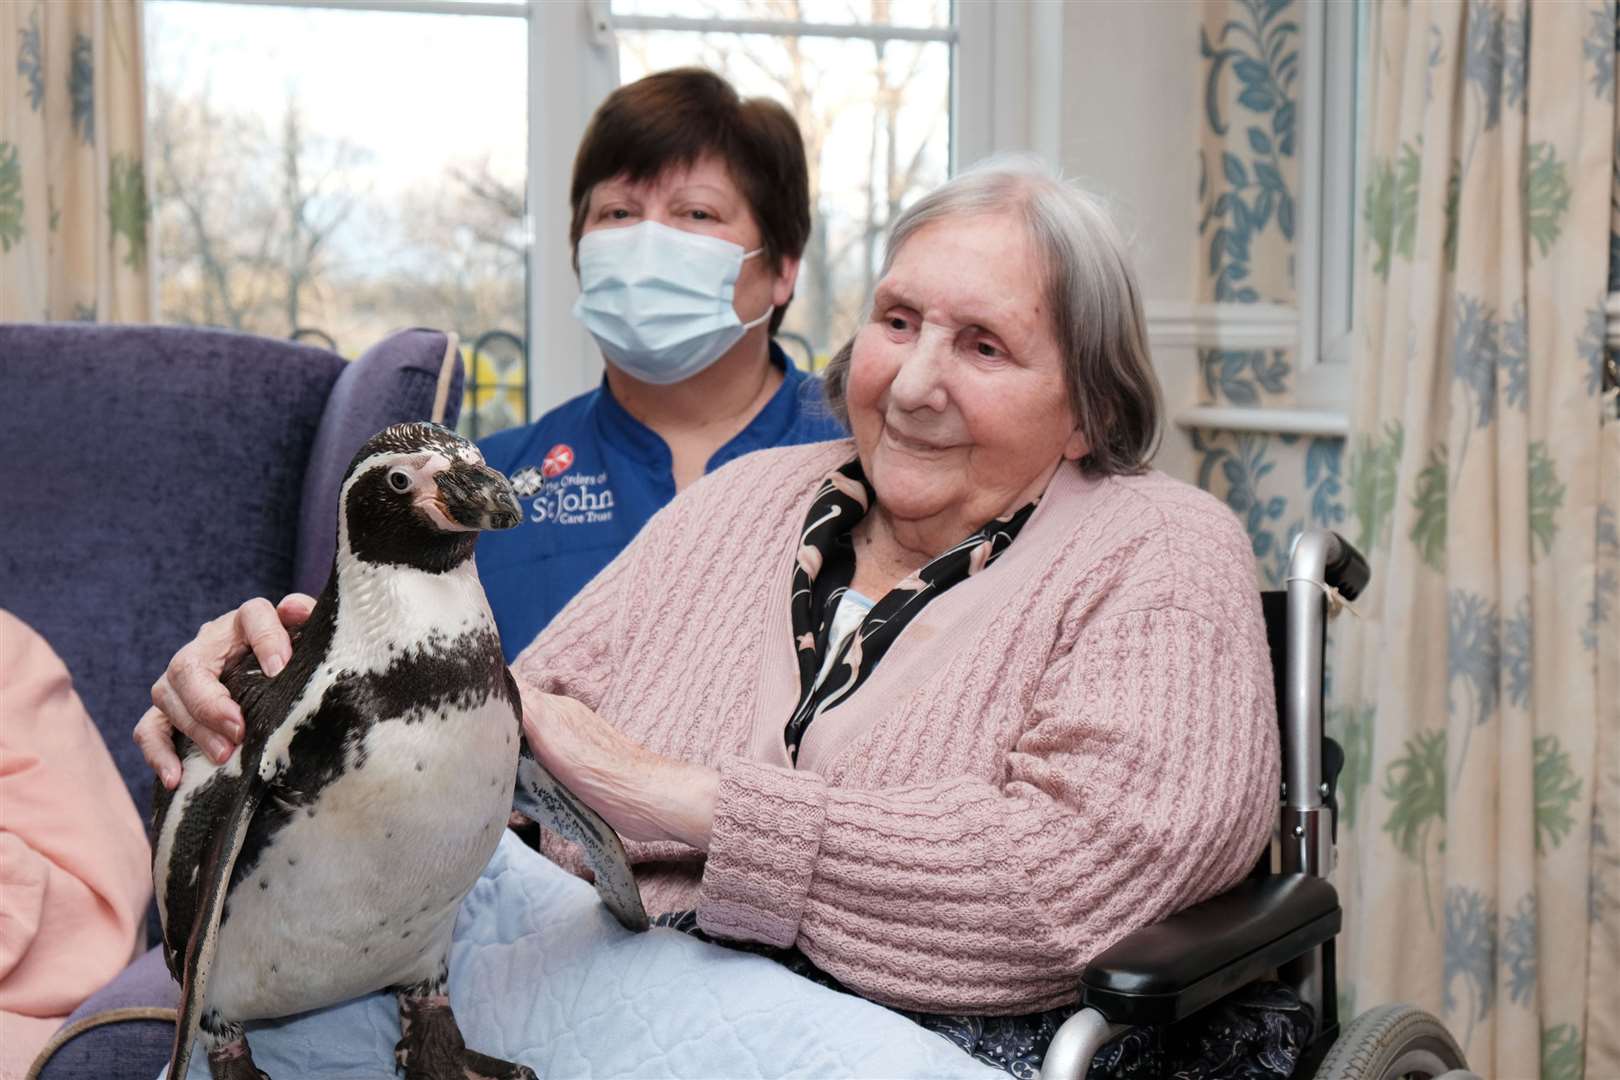 One of the penguins perched on a resident’s lap (Des Dubber/Orders of Saint John Care Trust/PA)